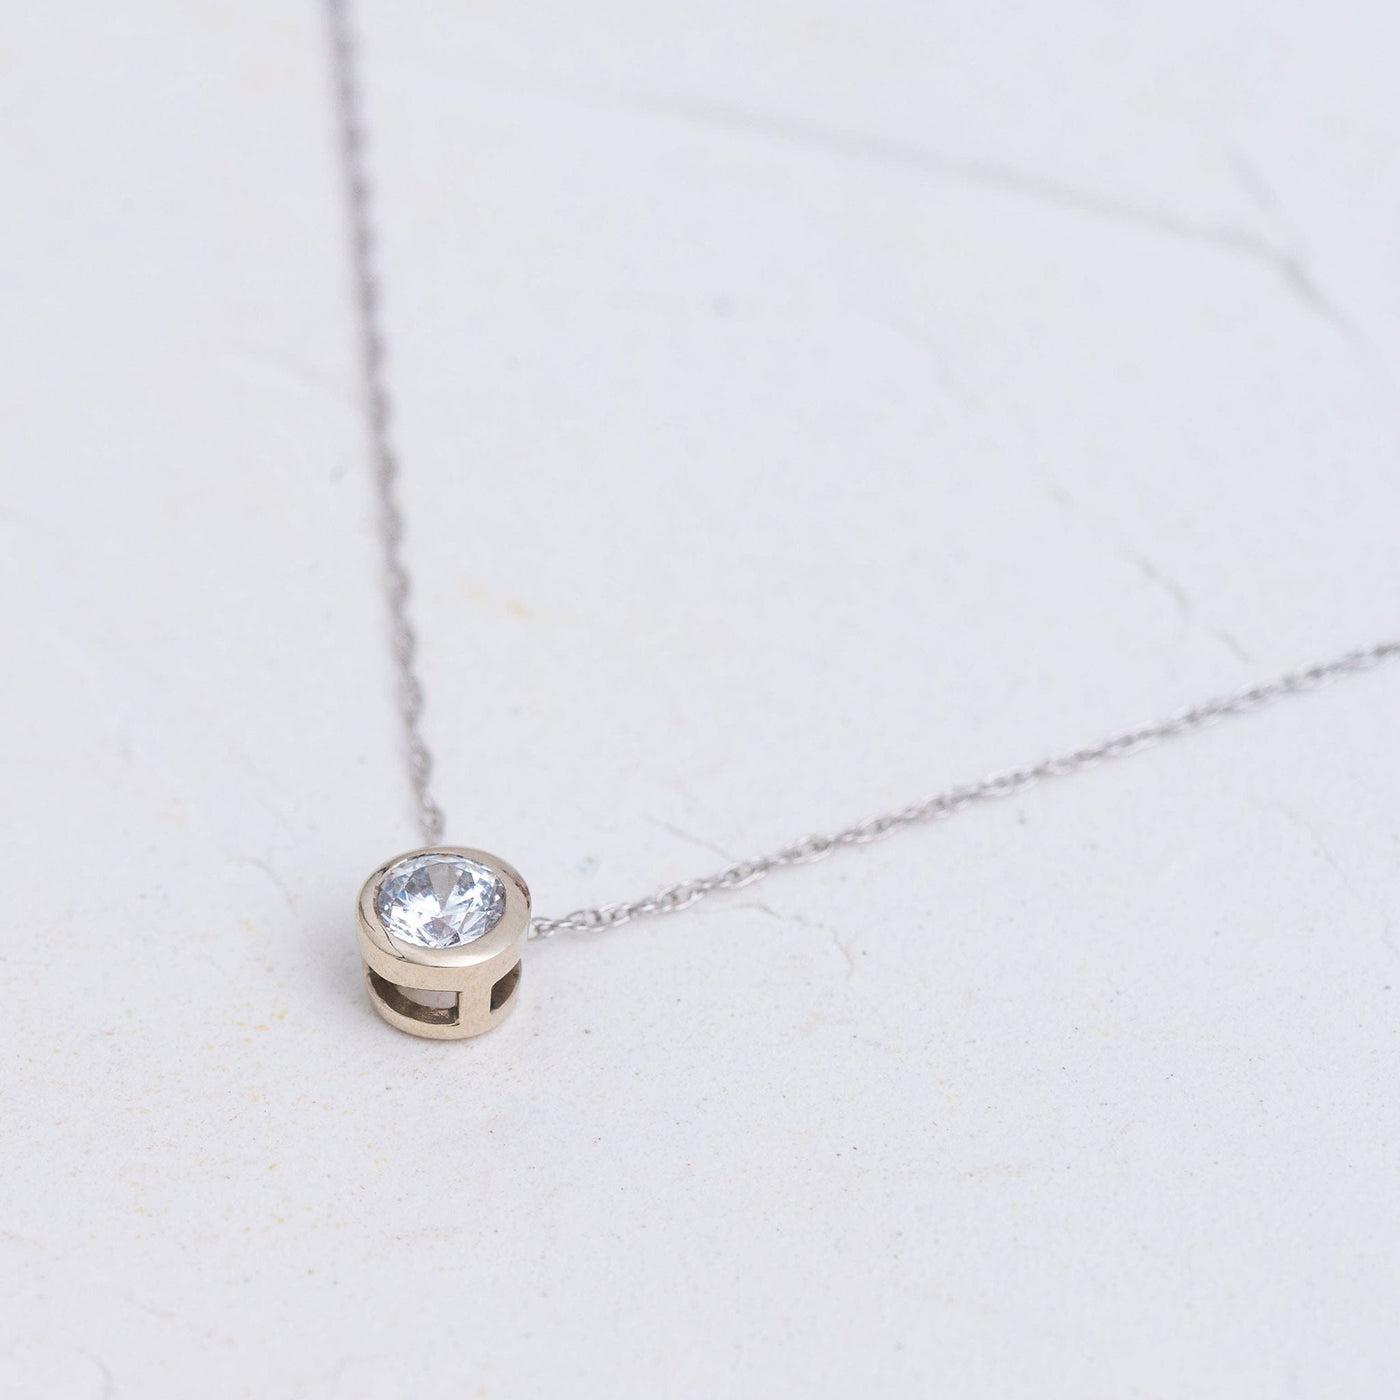 Floating Diamond Necklace in Sterling Silver